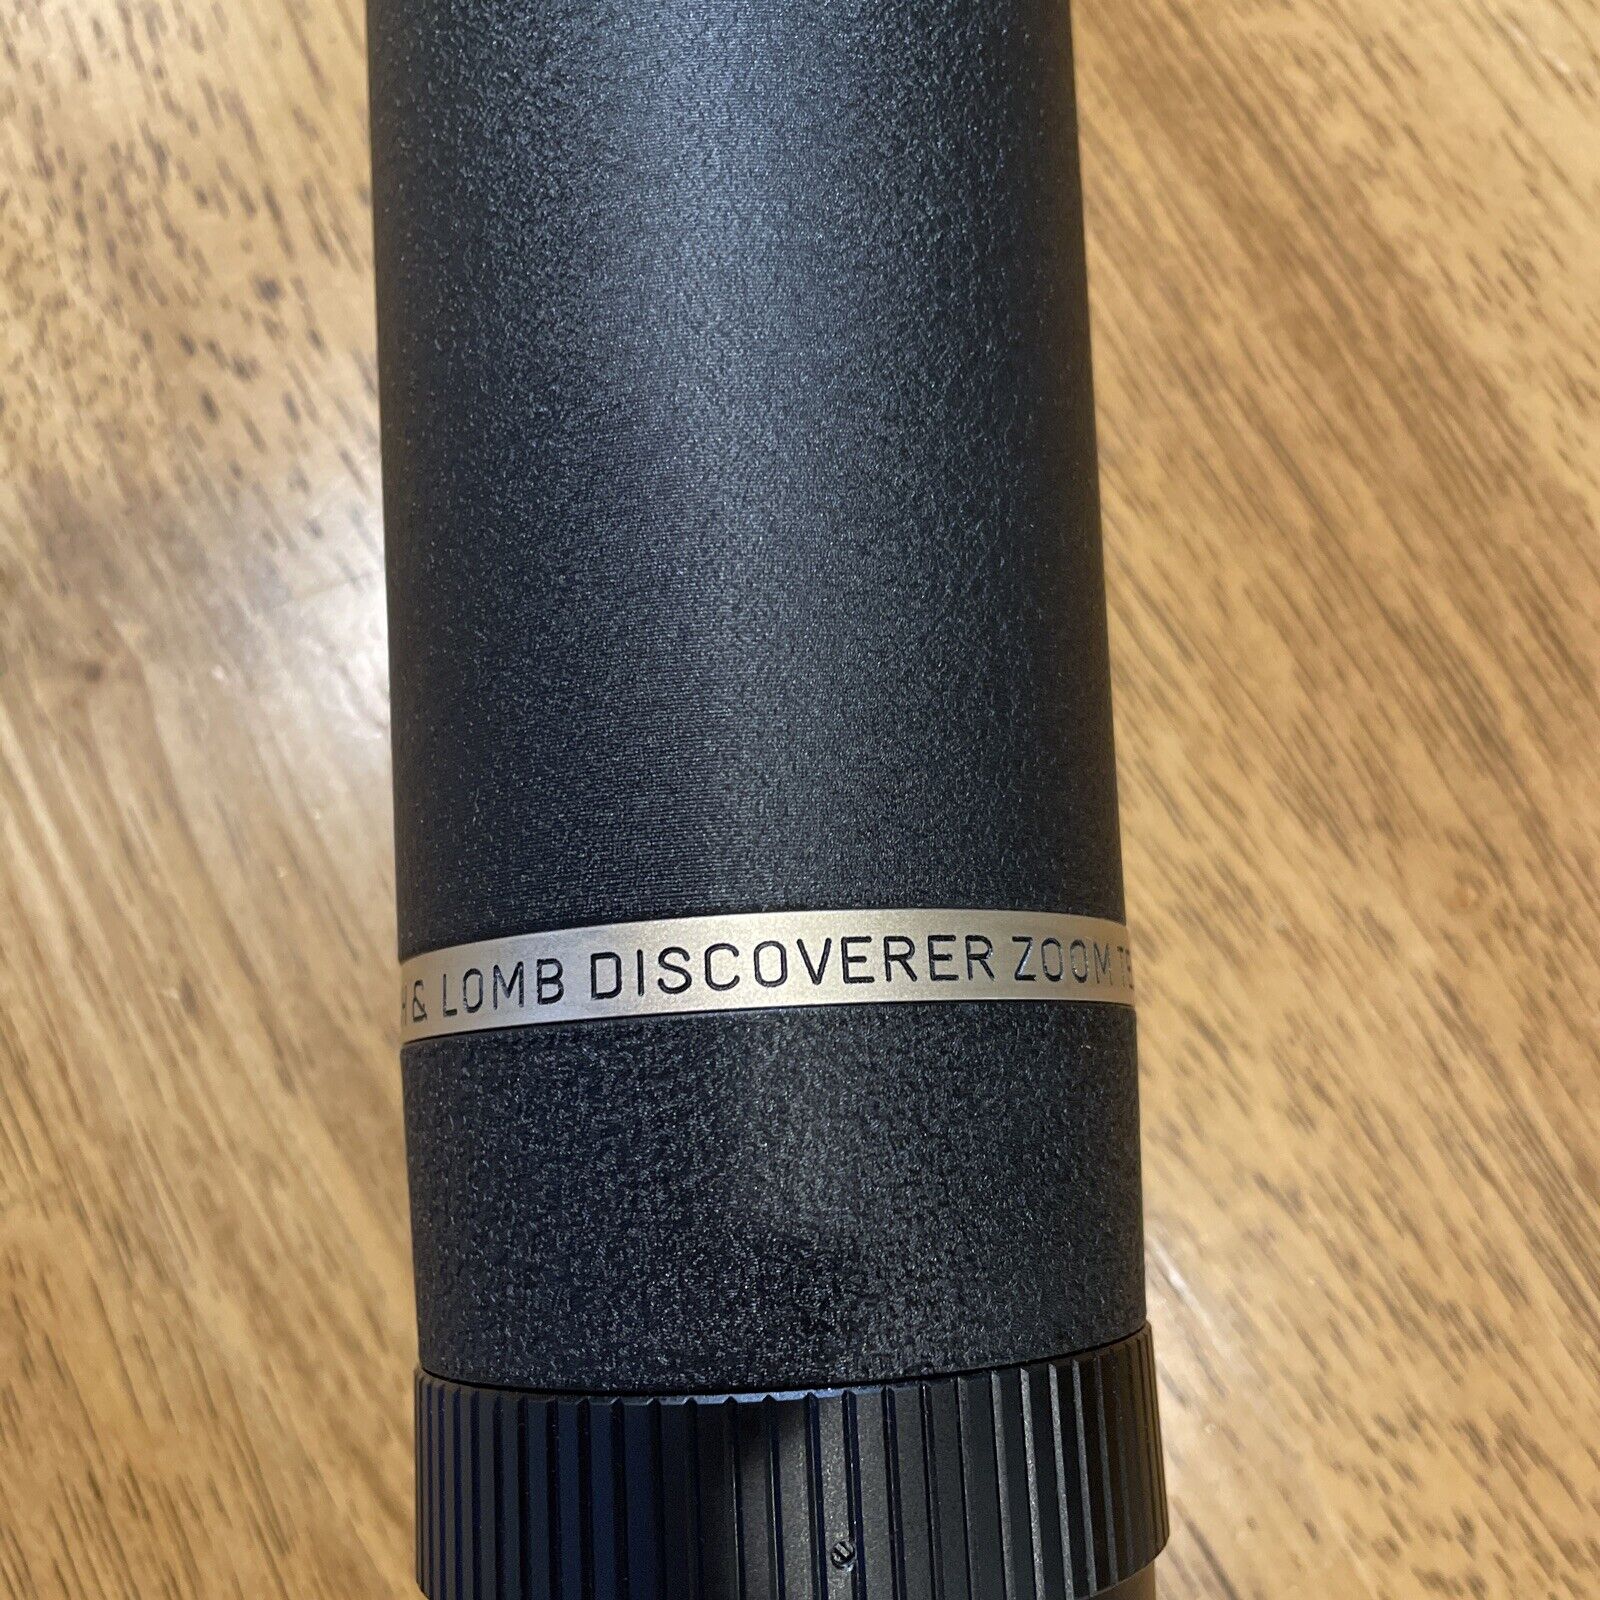 Bausch & Lomb zoom 60 mm telescope the discoverer 15 To 60 With Case Good